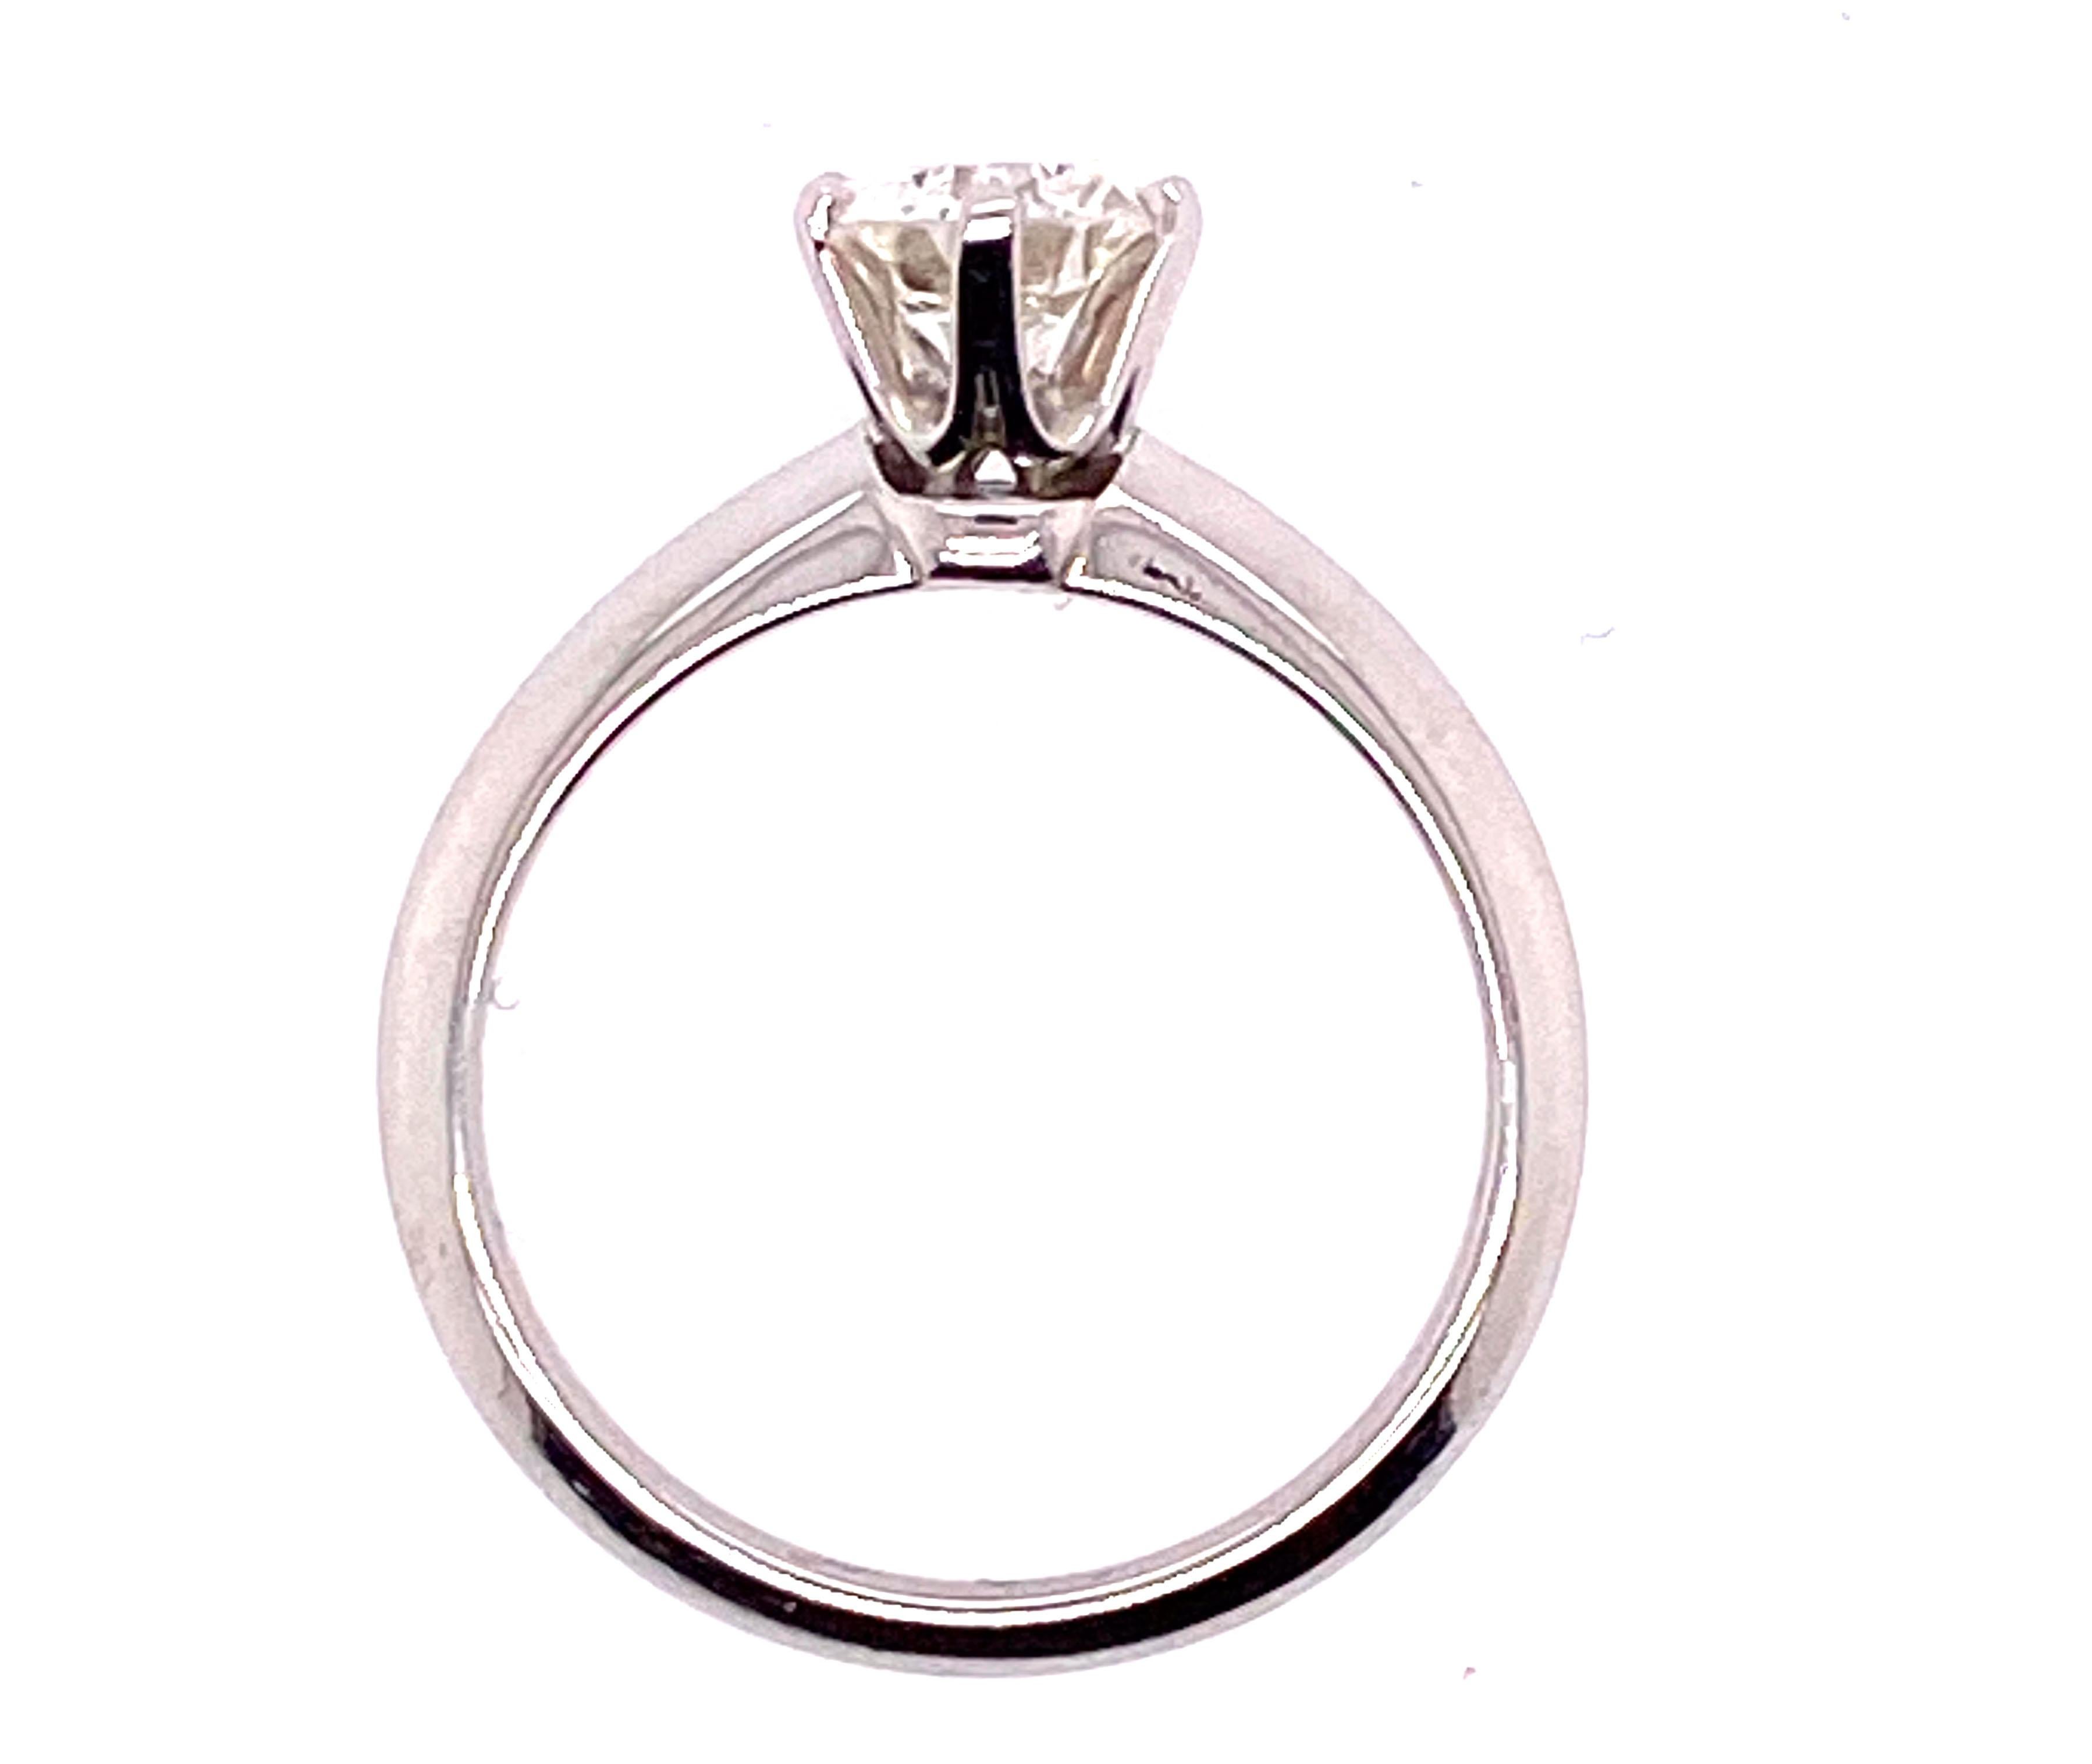 Tiffany & Co. GIA Certified .90ct G-VVS1 XXX Diamond Solitaire Platinum Engagement Ring



Featuring a Stunning Tiffany Inscribed .90ct G-VVS1 Genuine Natural Round Brilliant Cut Diamond

Tiffany Retail $16,200

100% Genuine Tiffany & Co.

Laser